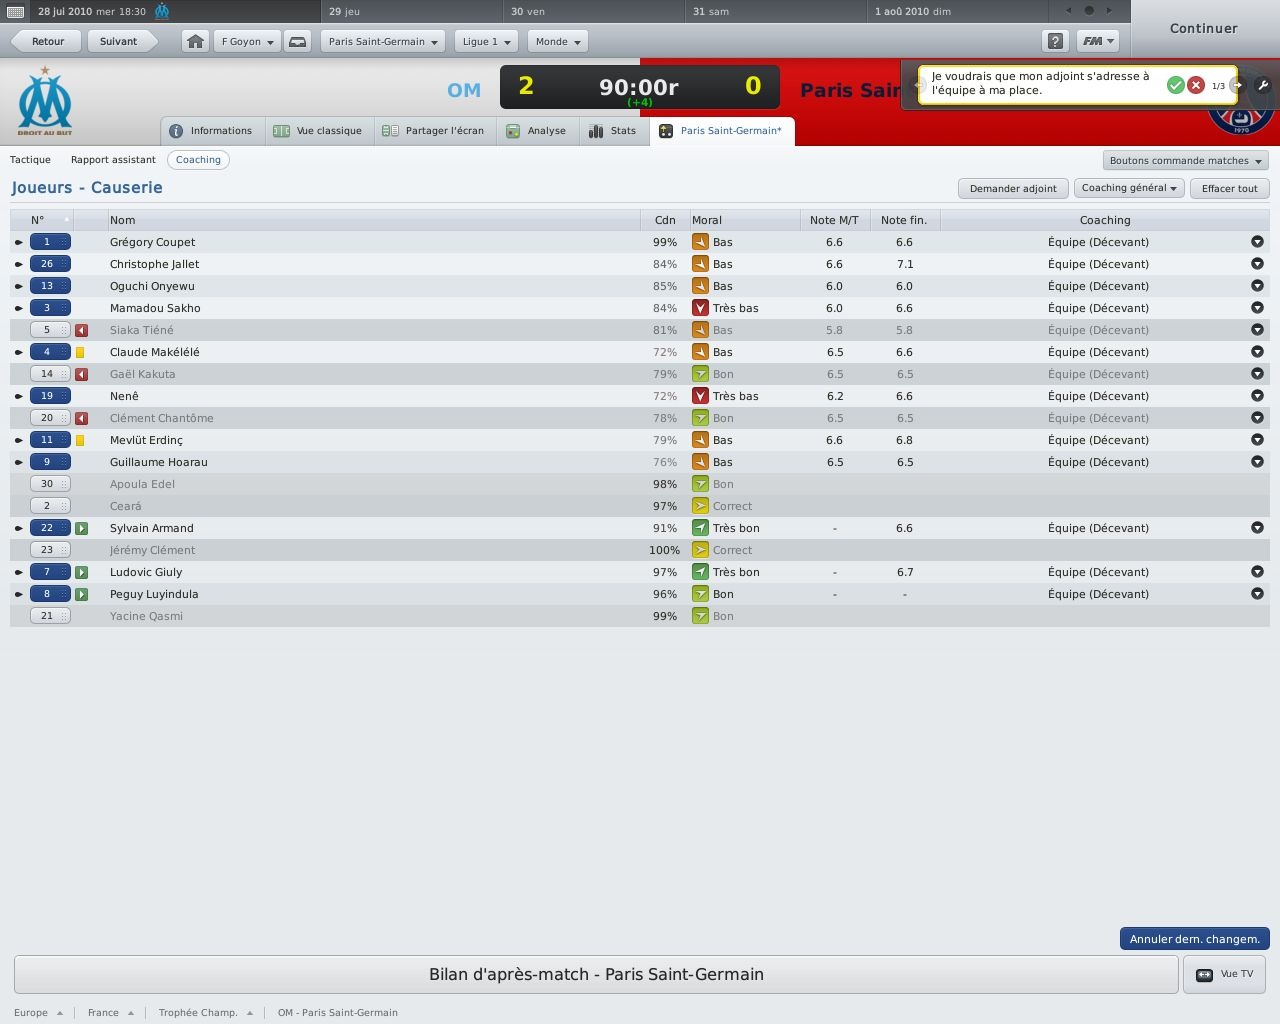 Patch Football Manager 2011 Francais